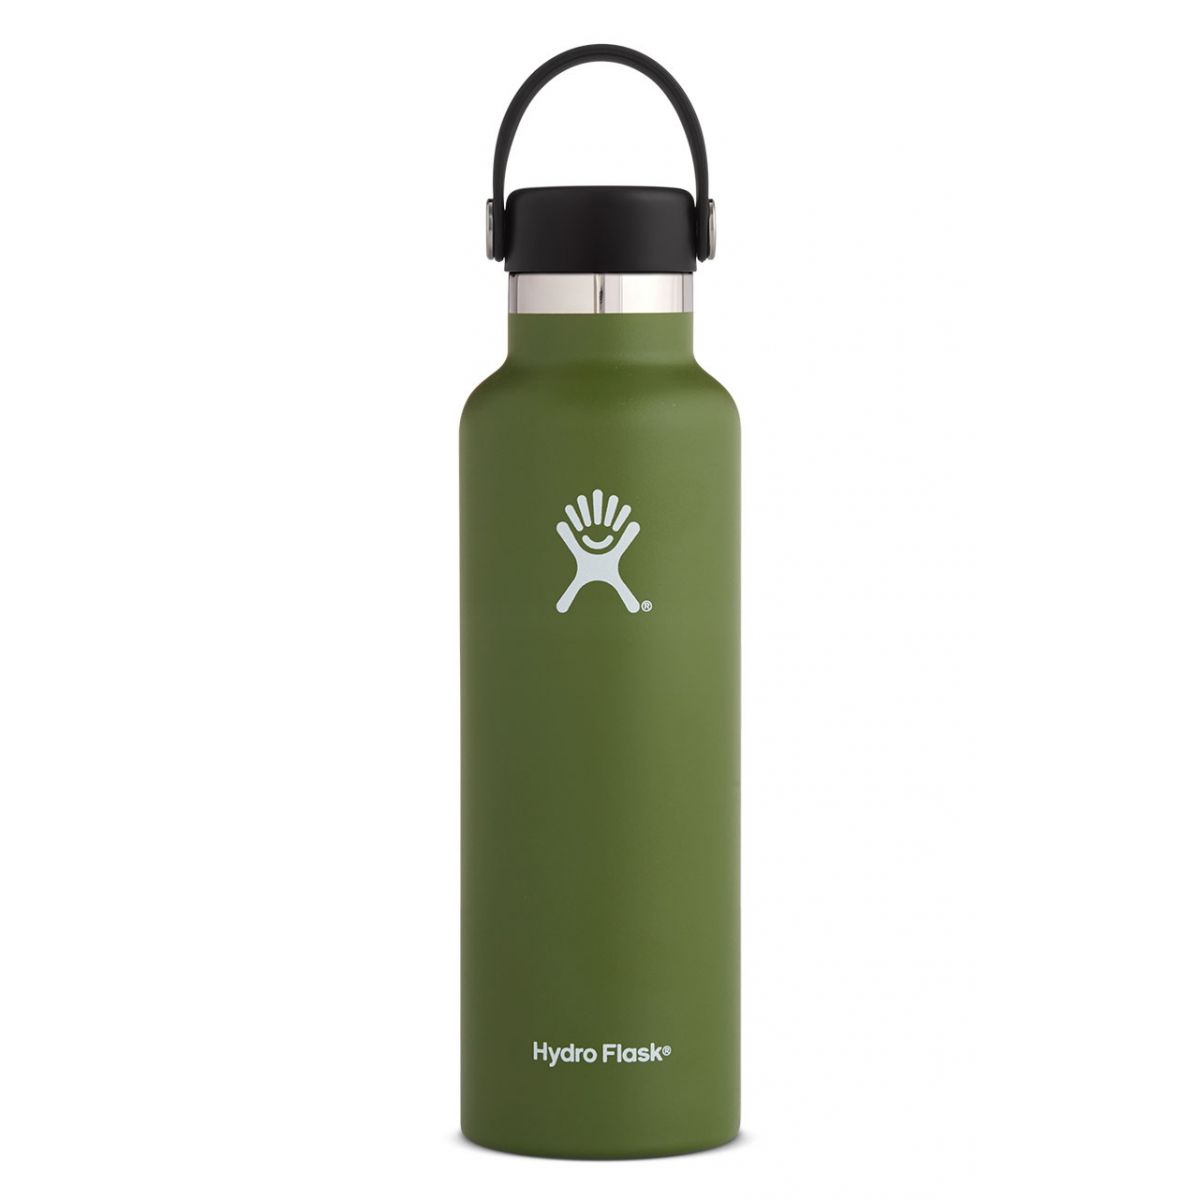 https://cdn.shopify.com/s/files/1/0286/8959/6519/products/hydro-flask-stainless-steel-vacuum-insulated-21-oz-standard-mouth-olive_1600x.jpg?v=1663454251